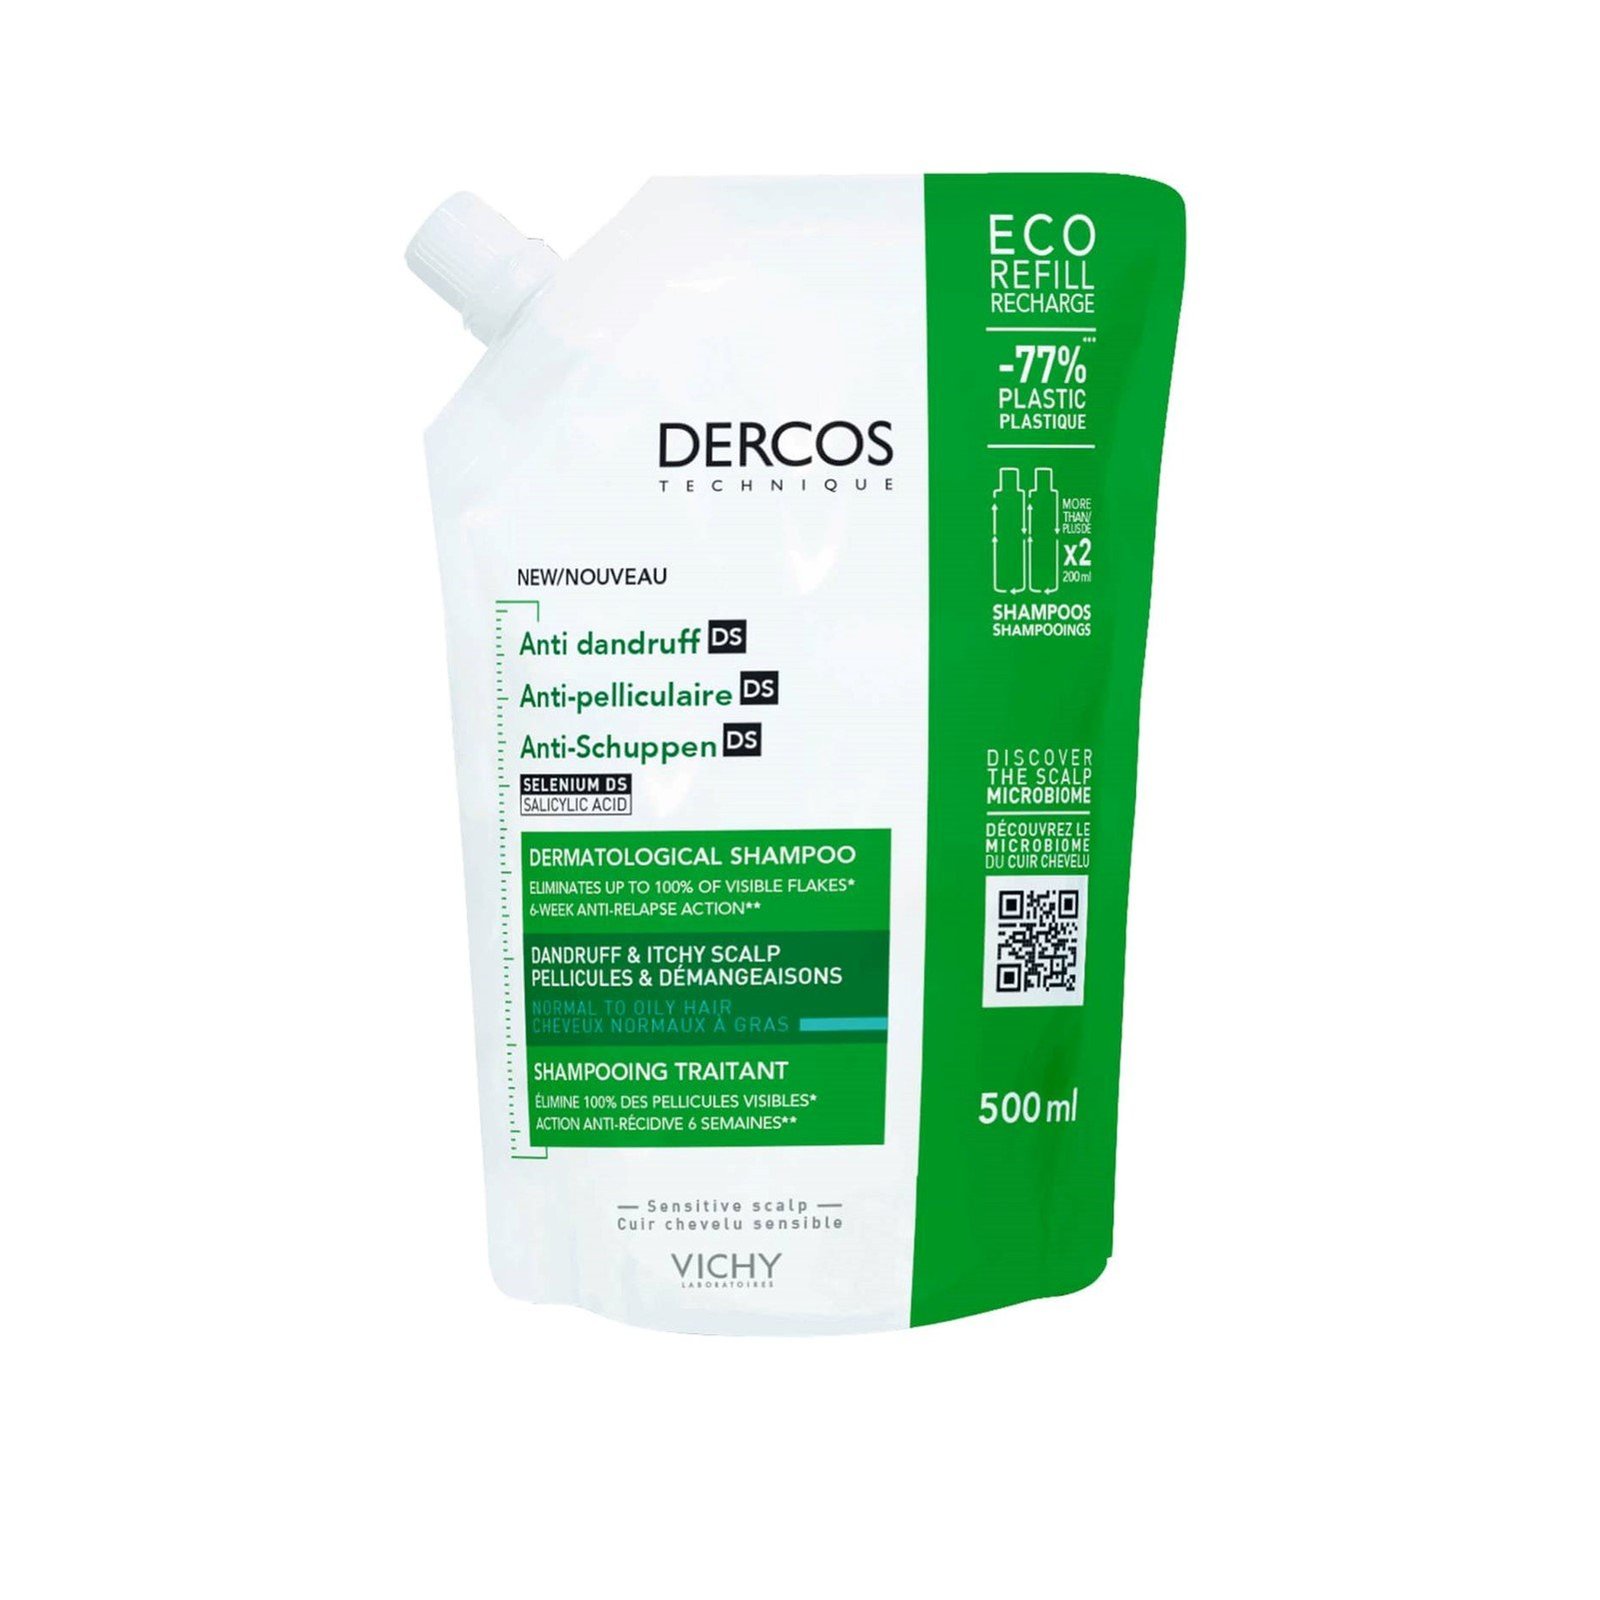 Vichy Dercos Anti-Dandruff DS Shampoo for Normal to Oily Hair Eco Refill 500ml